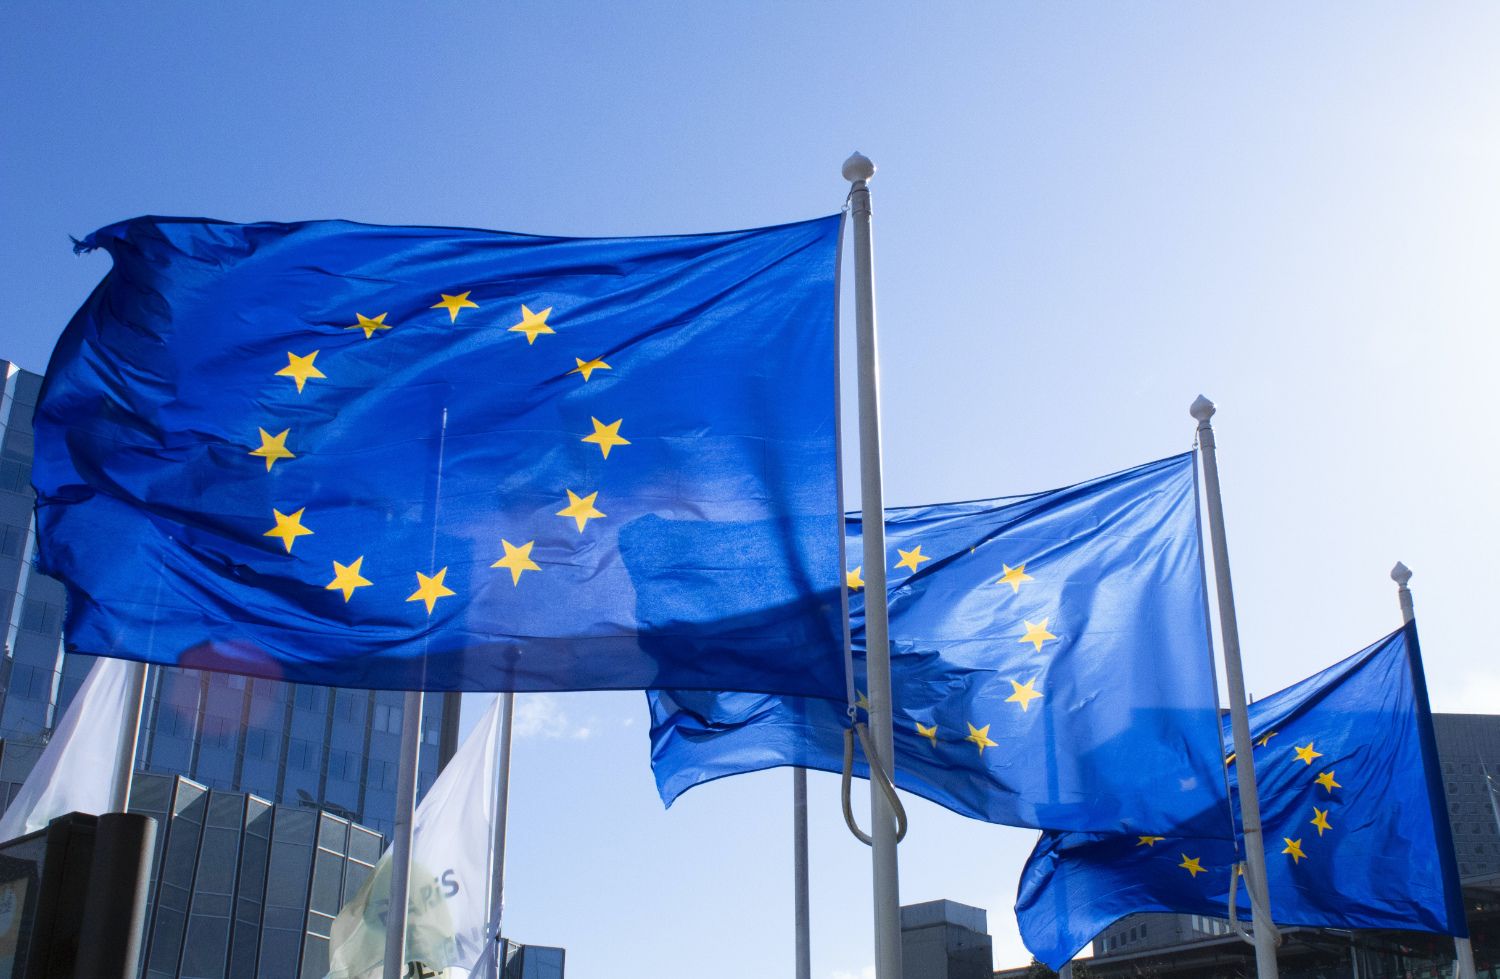 Three European union flags flying from right to left with blue sky and buildings in the background.